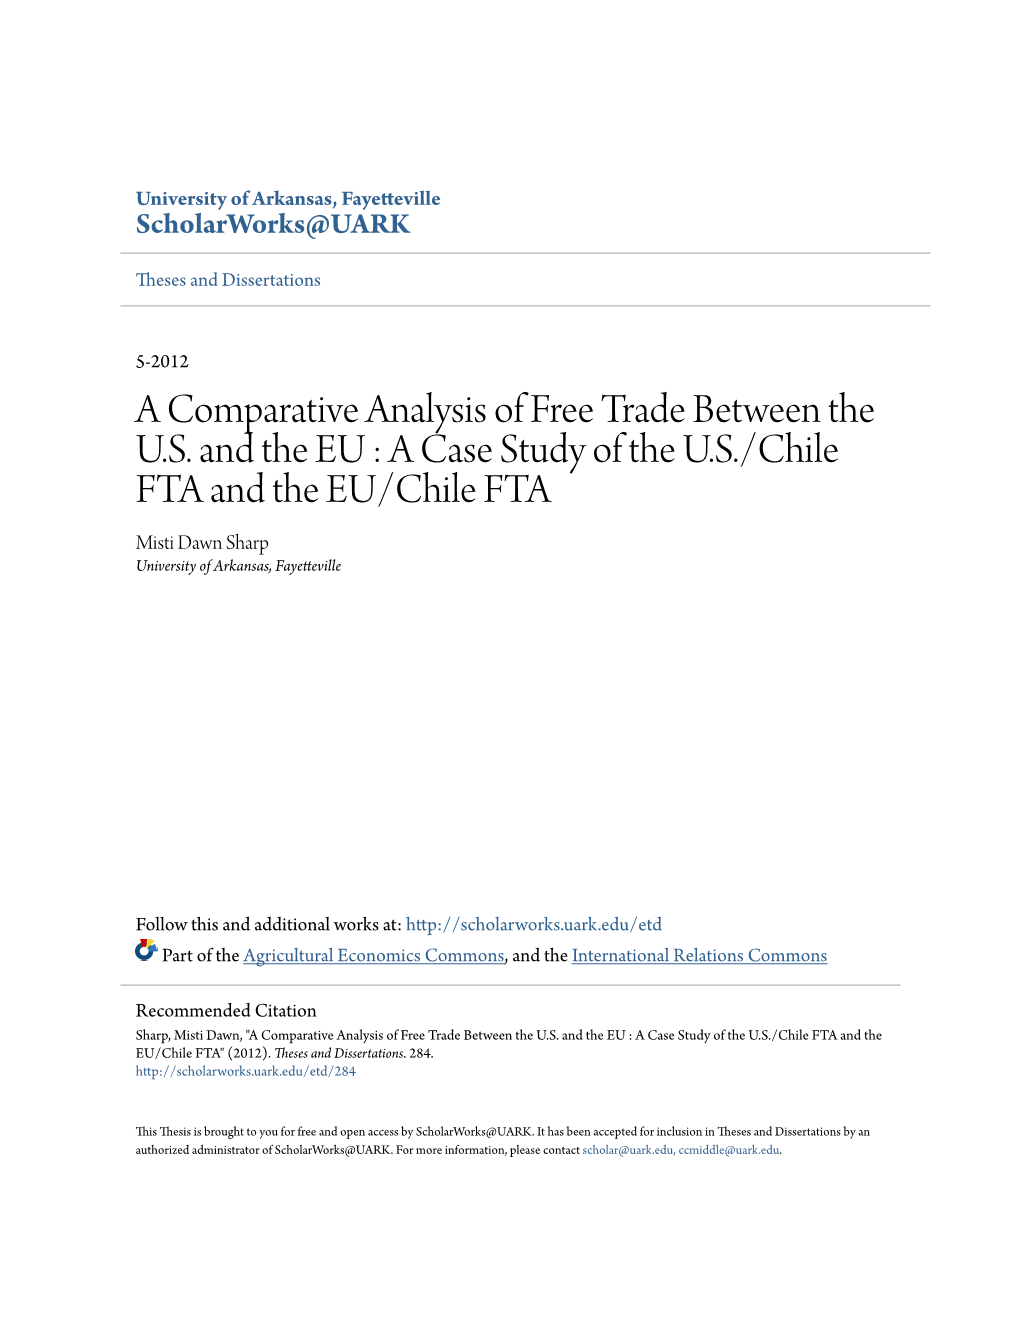 A Comparative Analysis of Free Trade Between the US and the EU